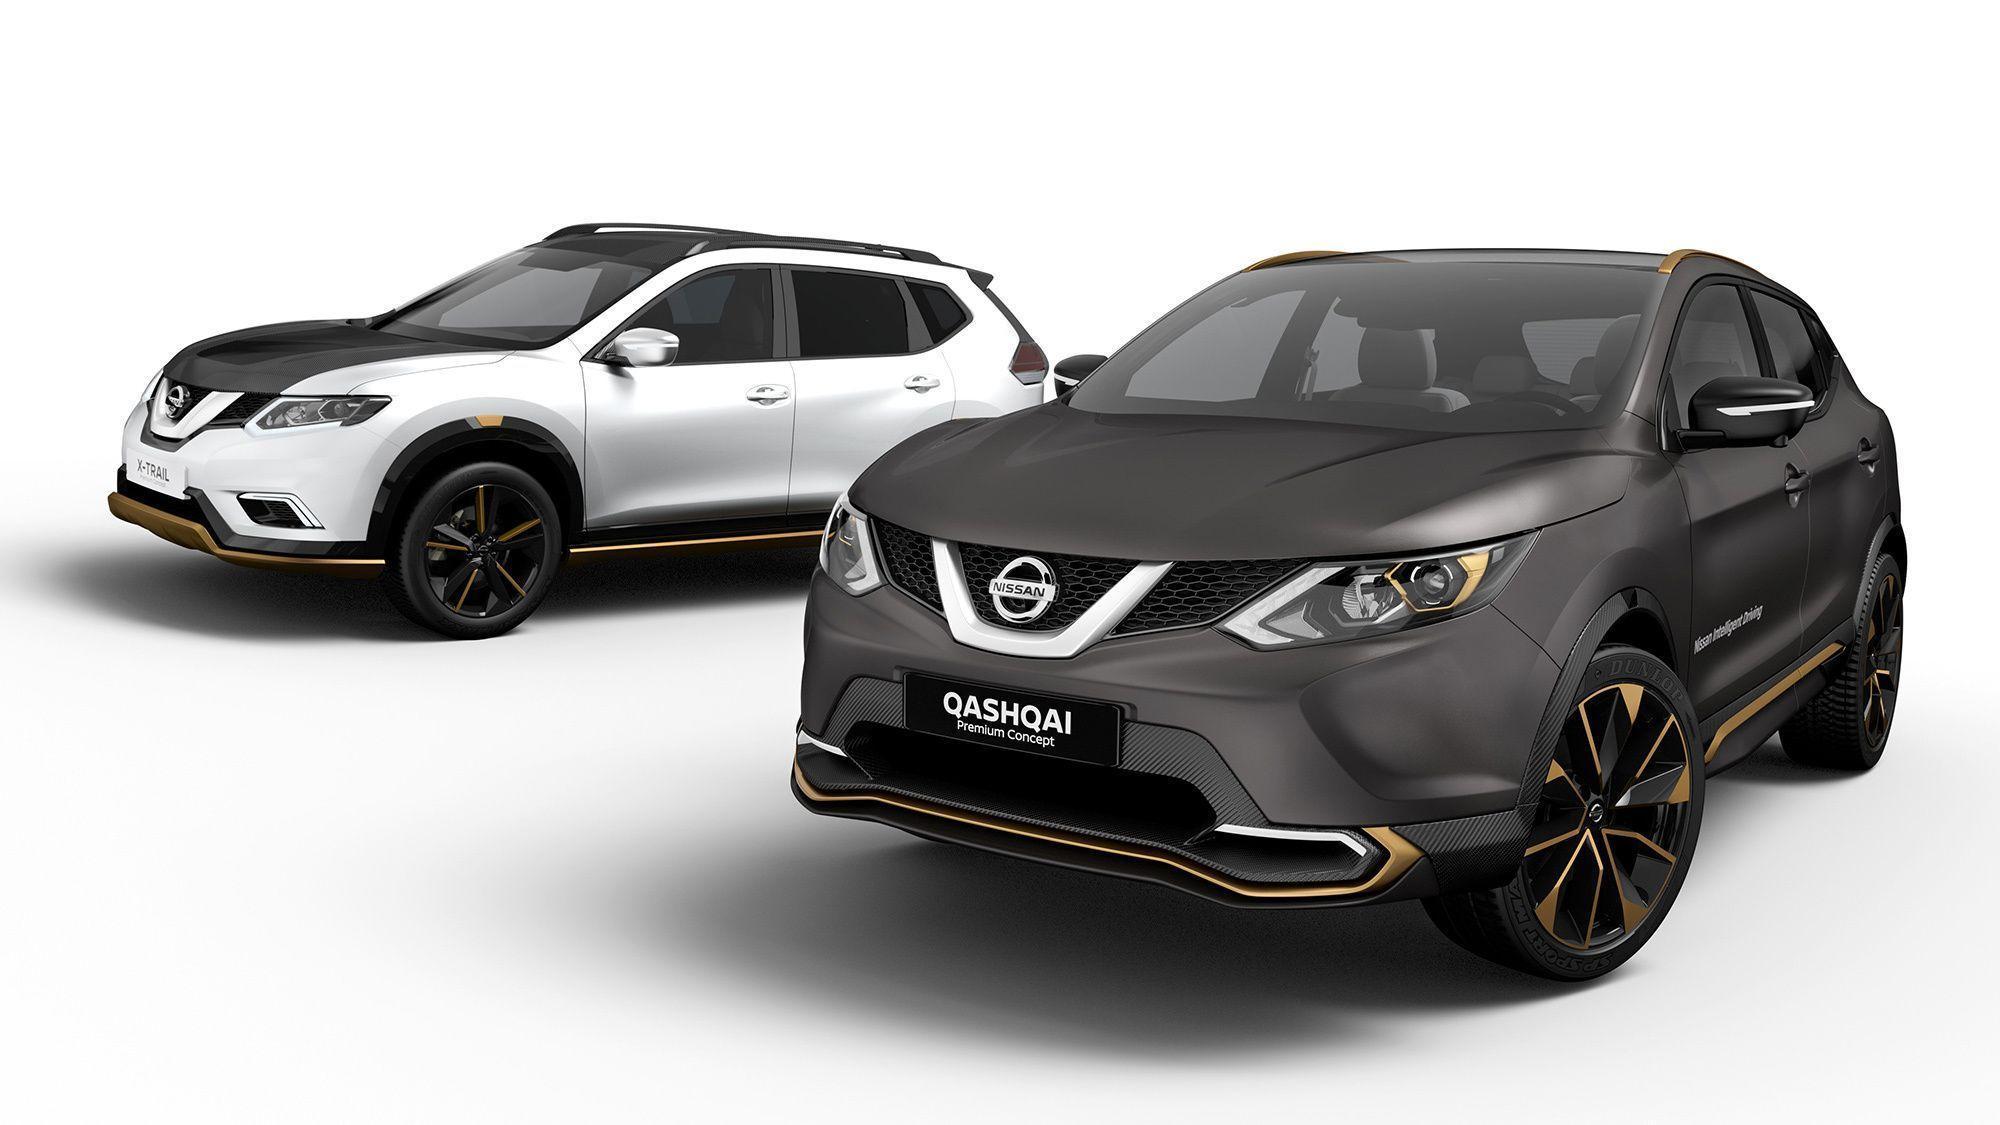 Nissan Qashqai 2017 Wallpaper Image Photo Picture Background